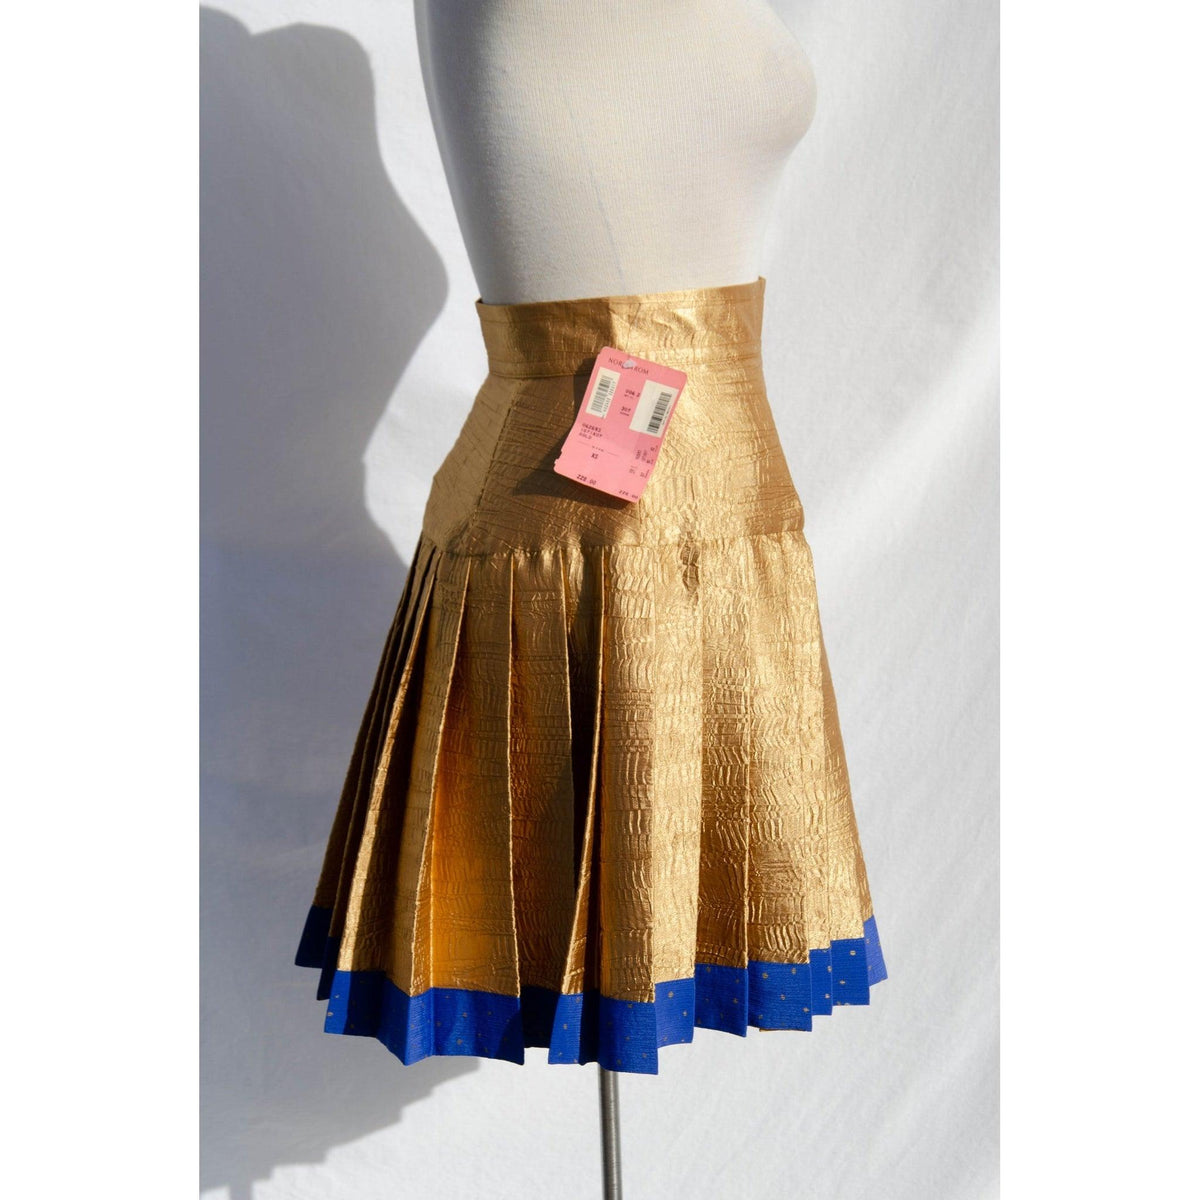 JEAN MARC Vintage Gold Pleated Skirt | Size XS-S - theREMODA